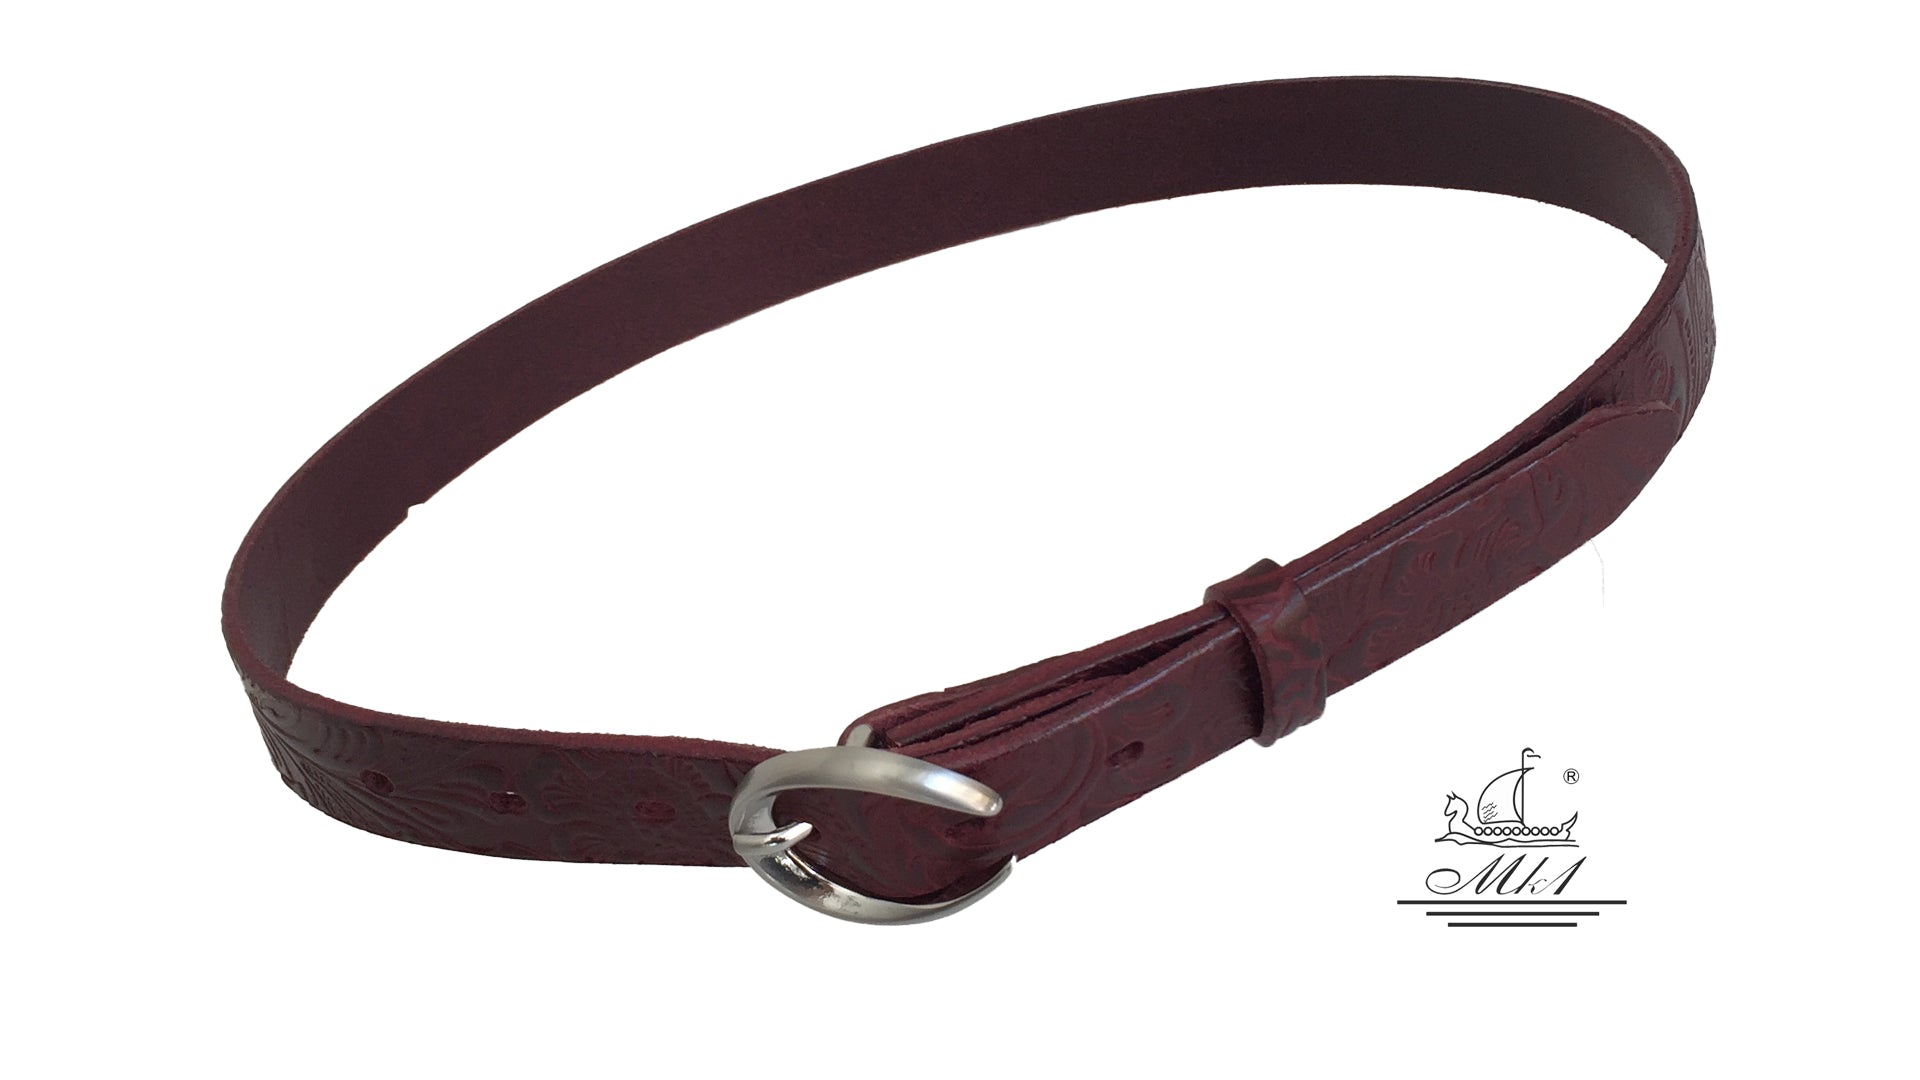 Women's thin belt handcrafted from redbrown natural leather with floral design 101589/25Nrb-ll